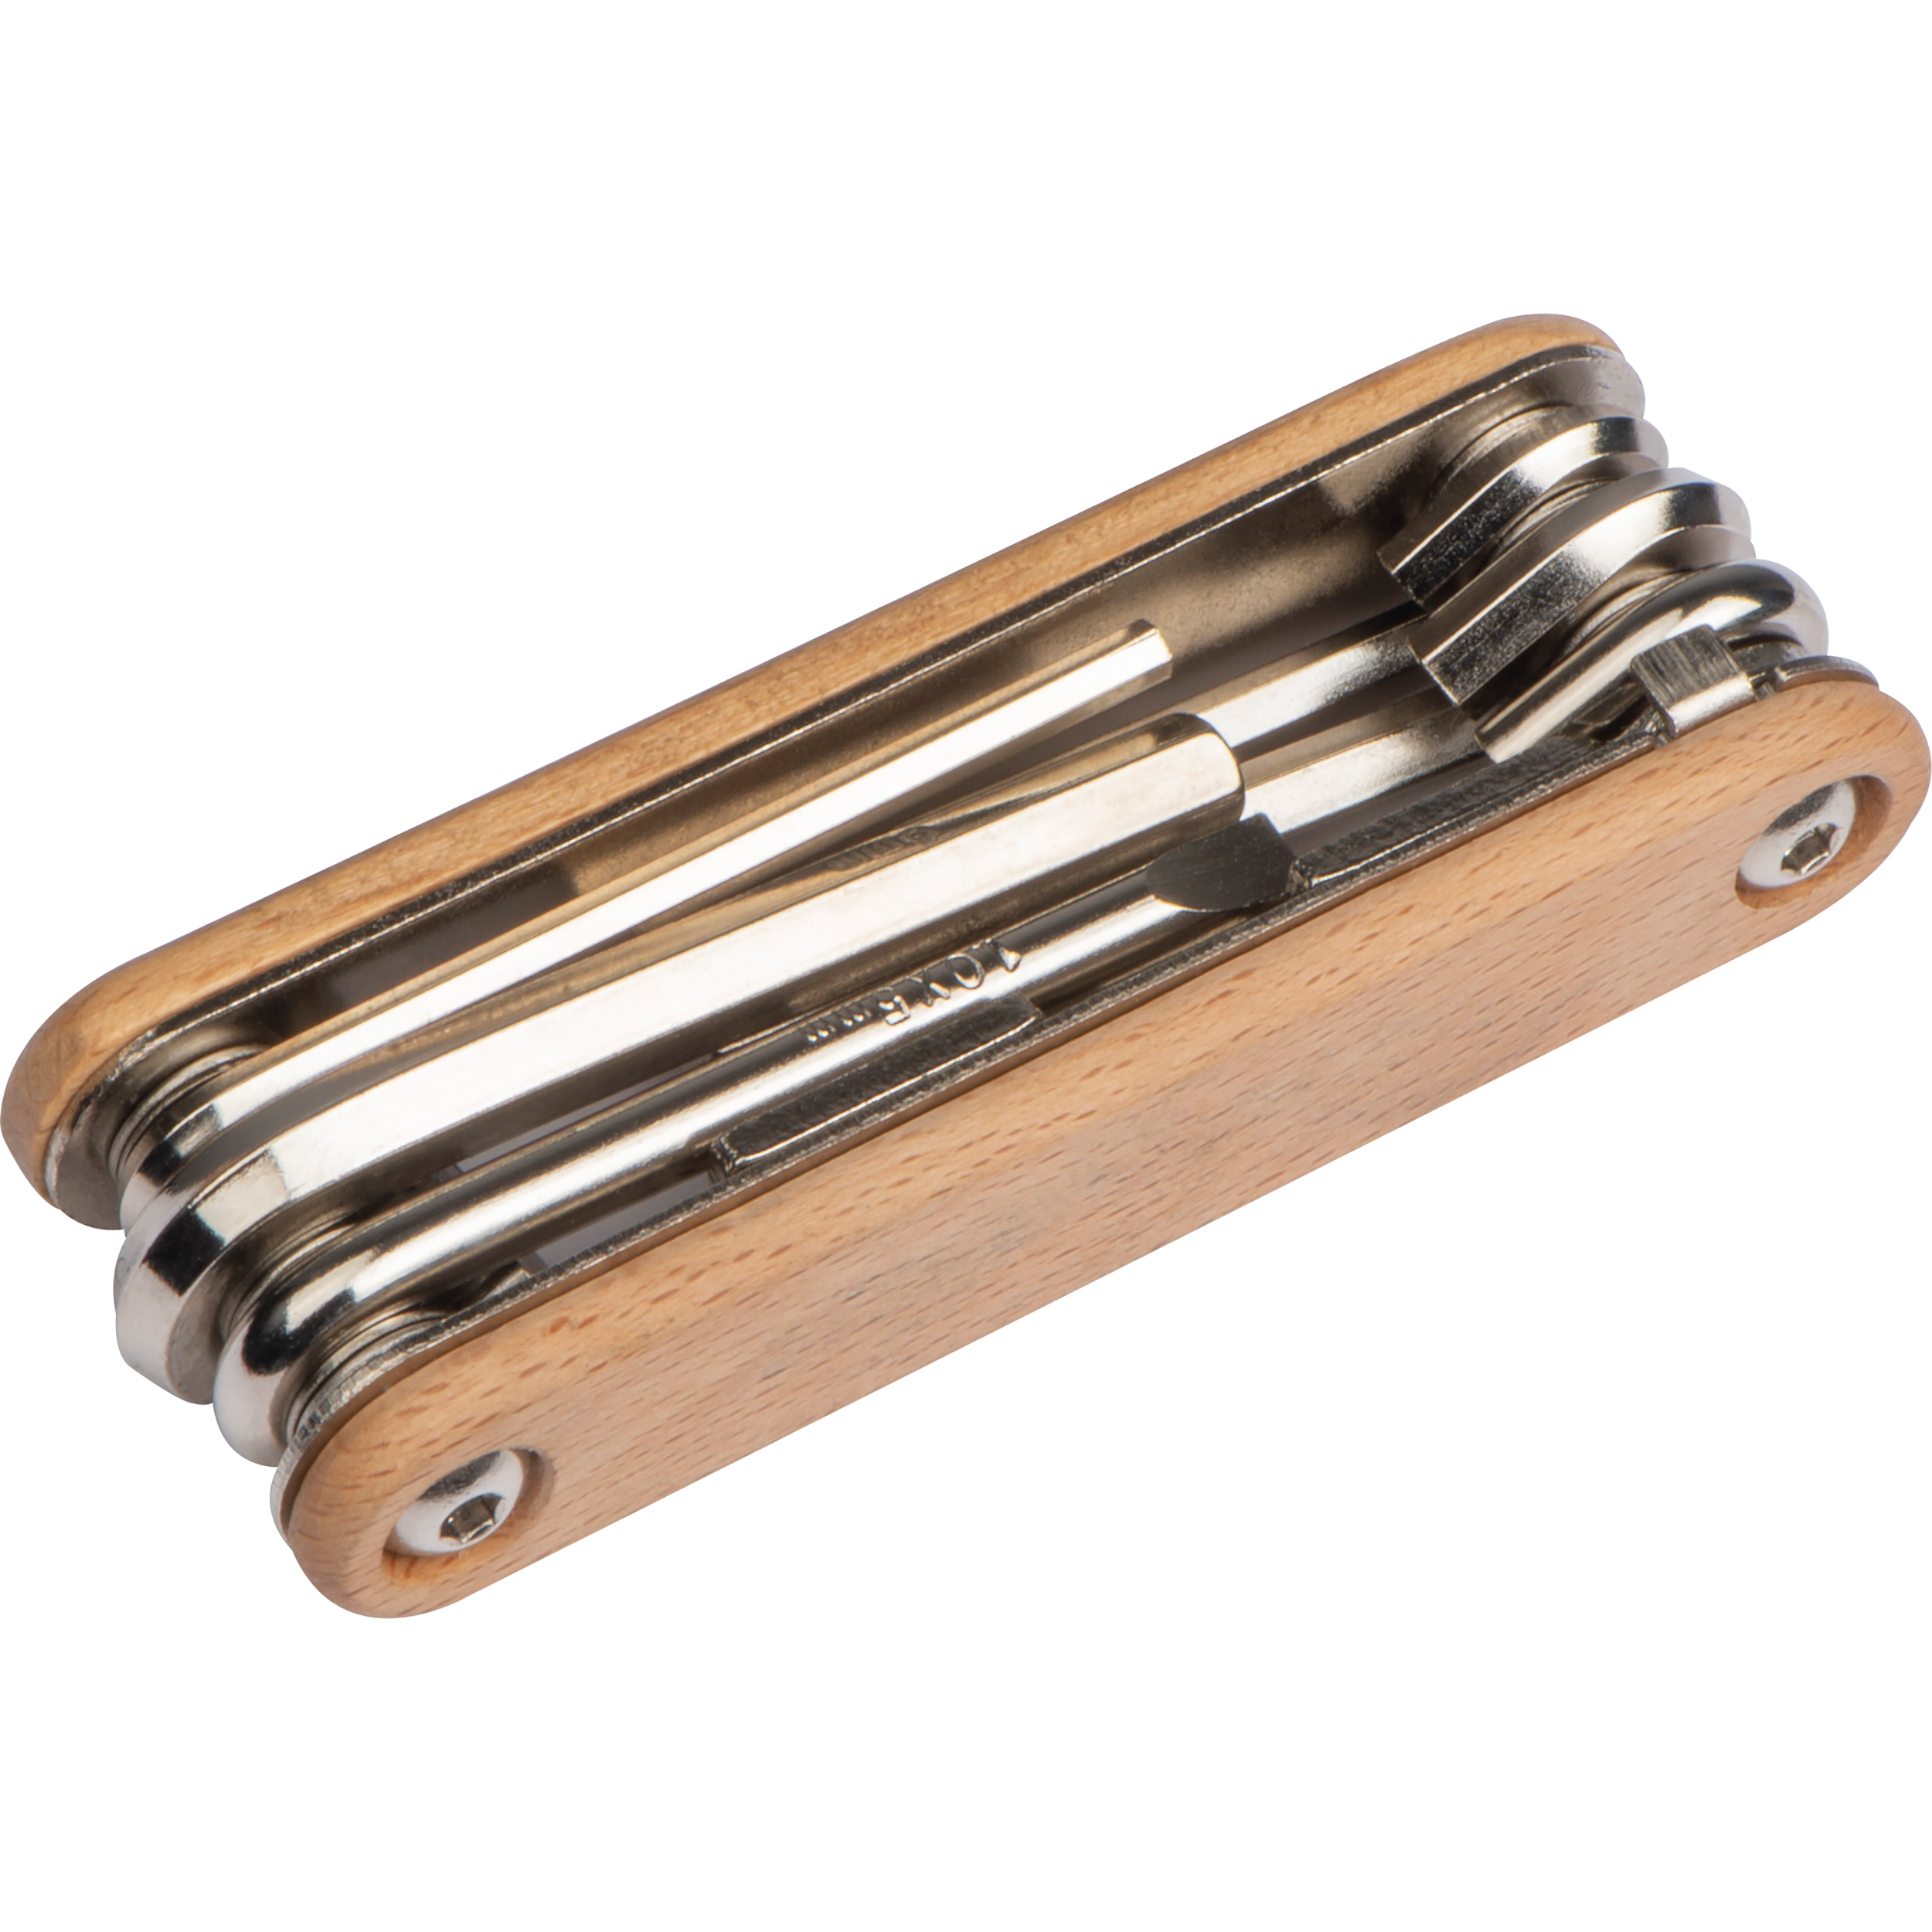 Bicycle Tool in wooden casing